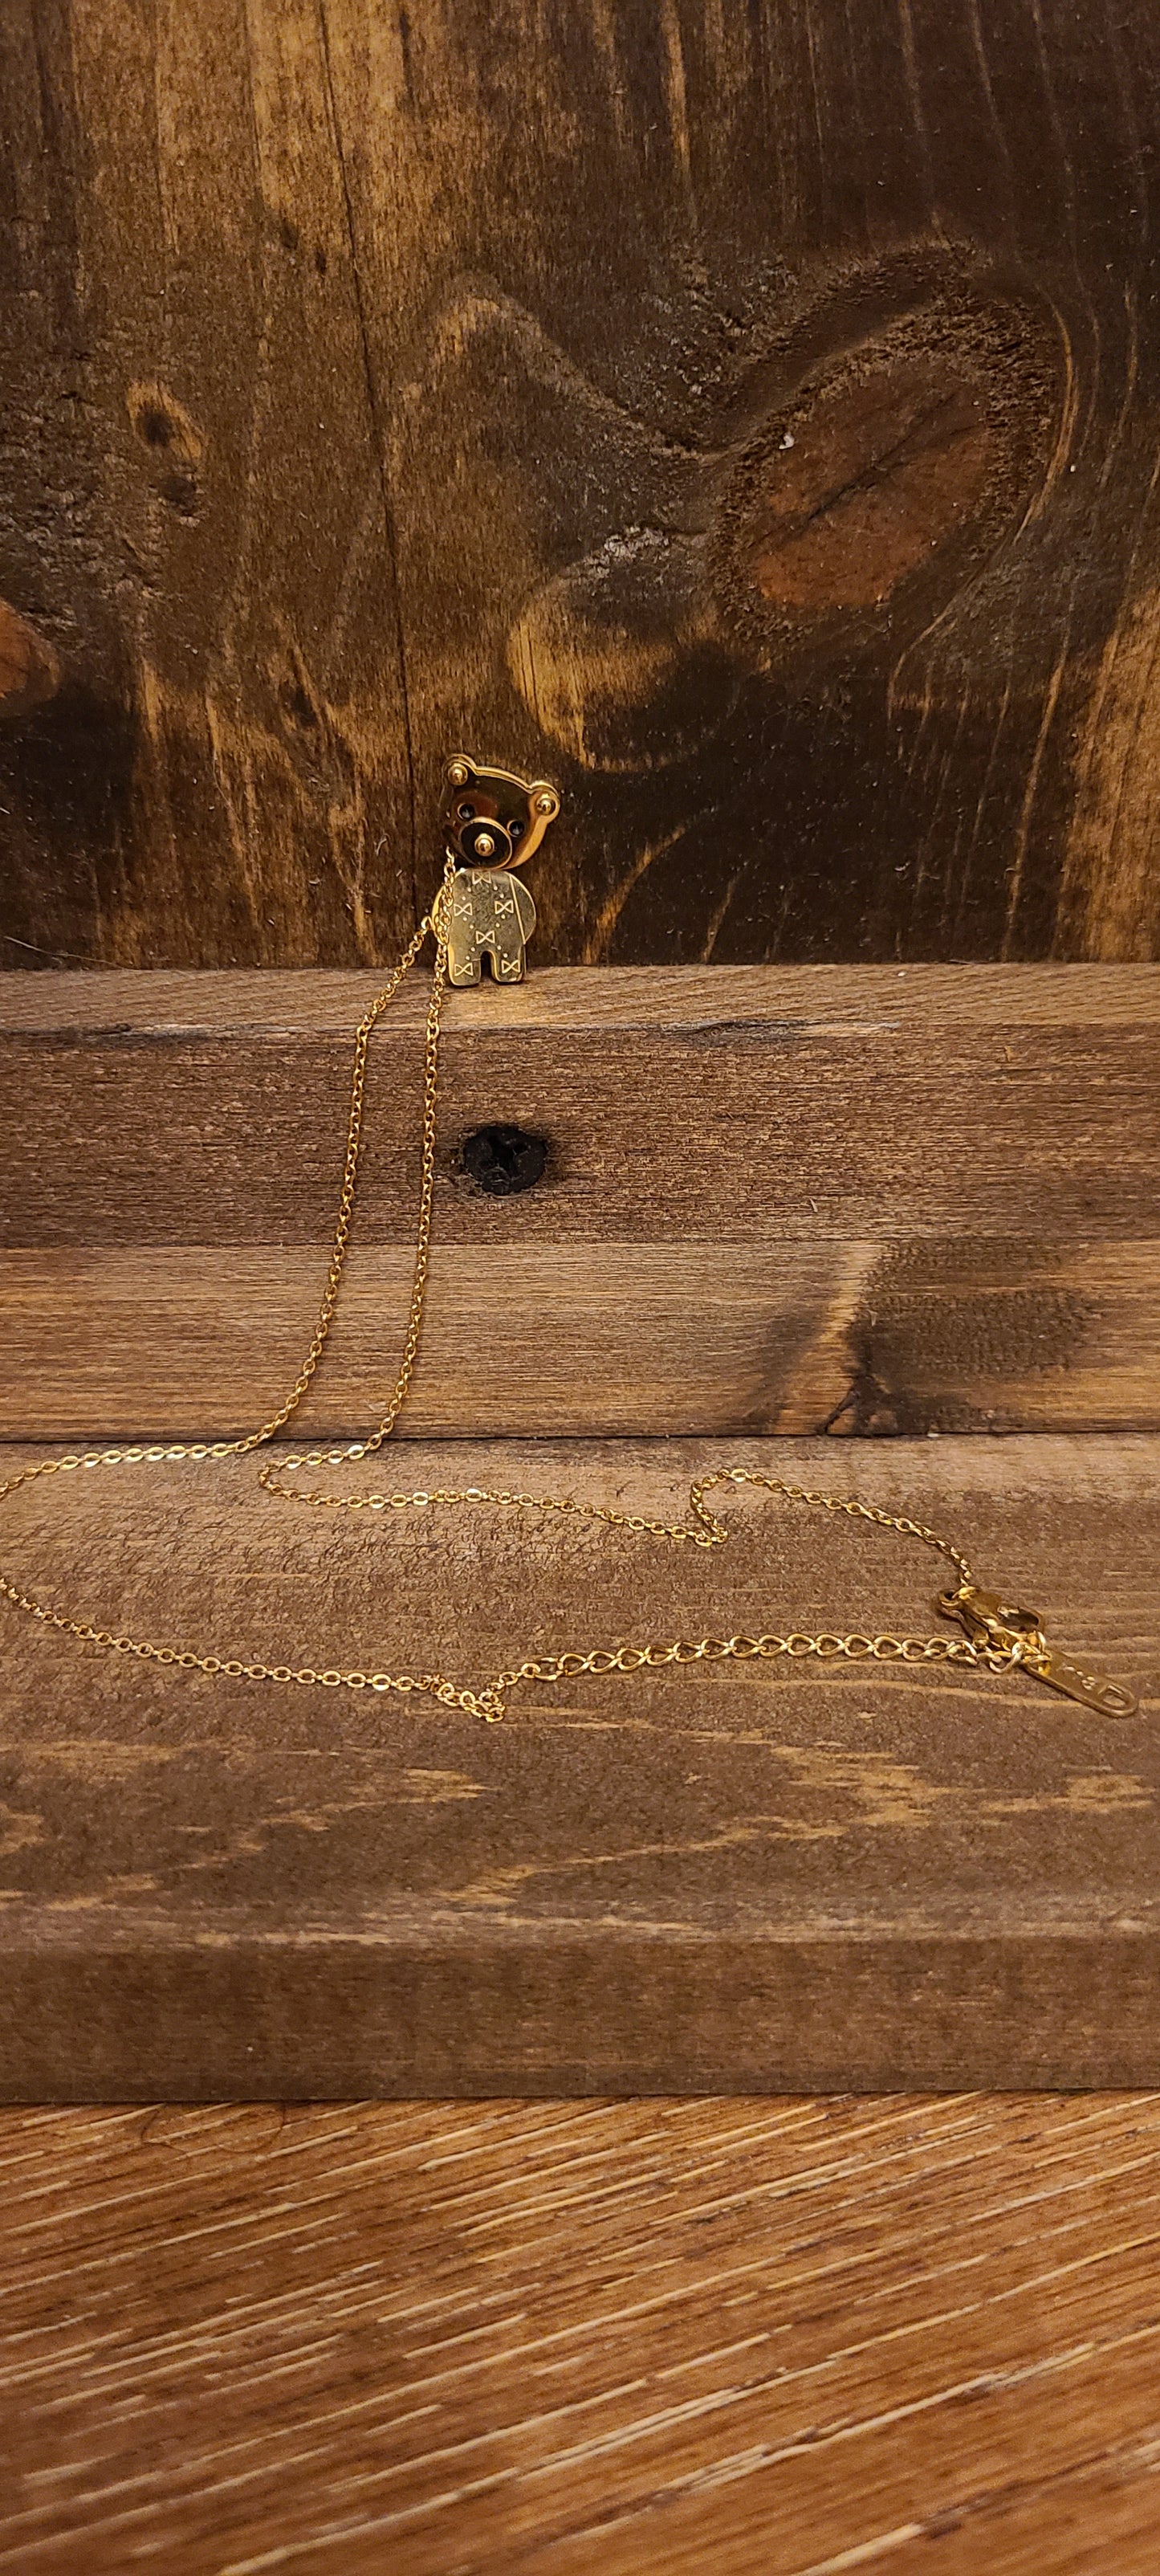 18K Gold Plated Stainless Steel Charm Teddy Bear Necklace.